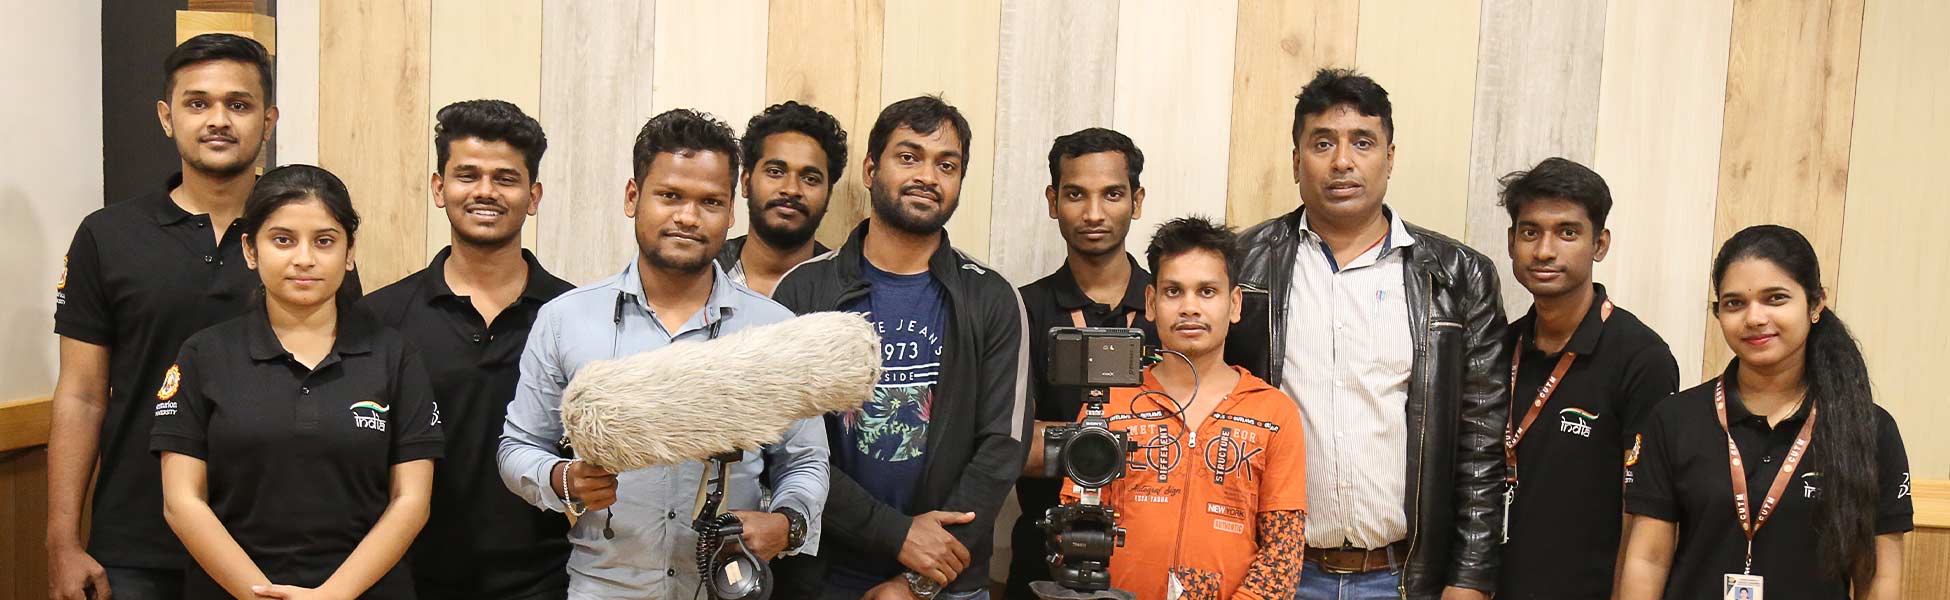 web series production house in india, web series production house in mumbai, web series production company in india, web series production company in mumbai